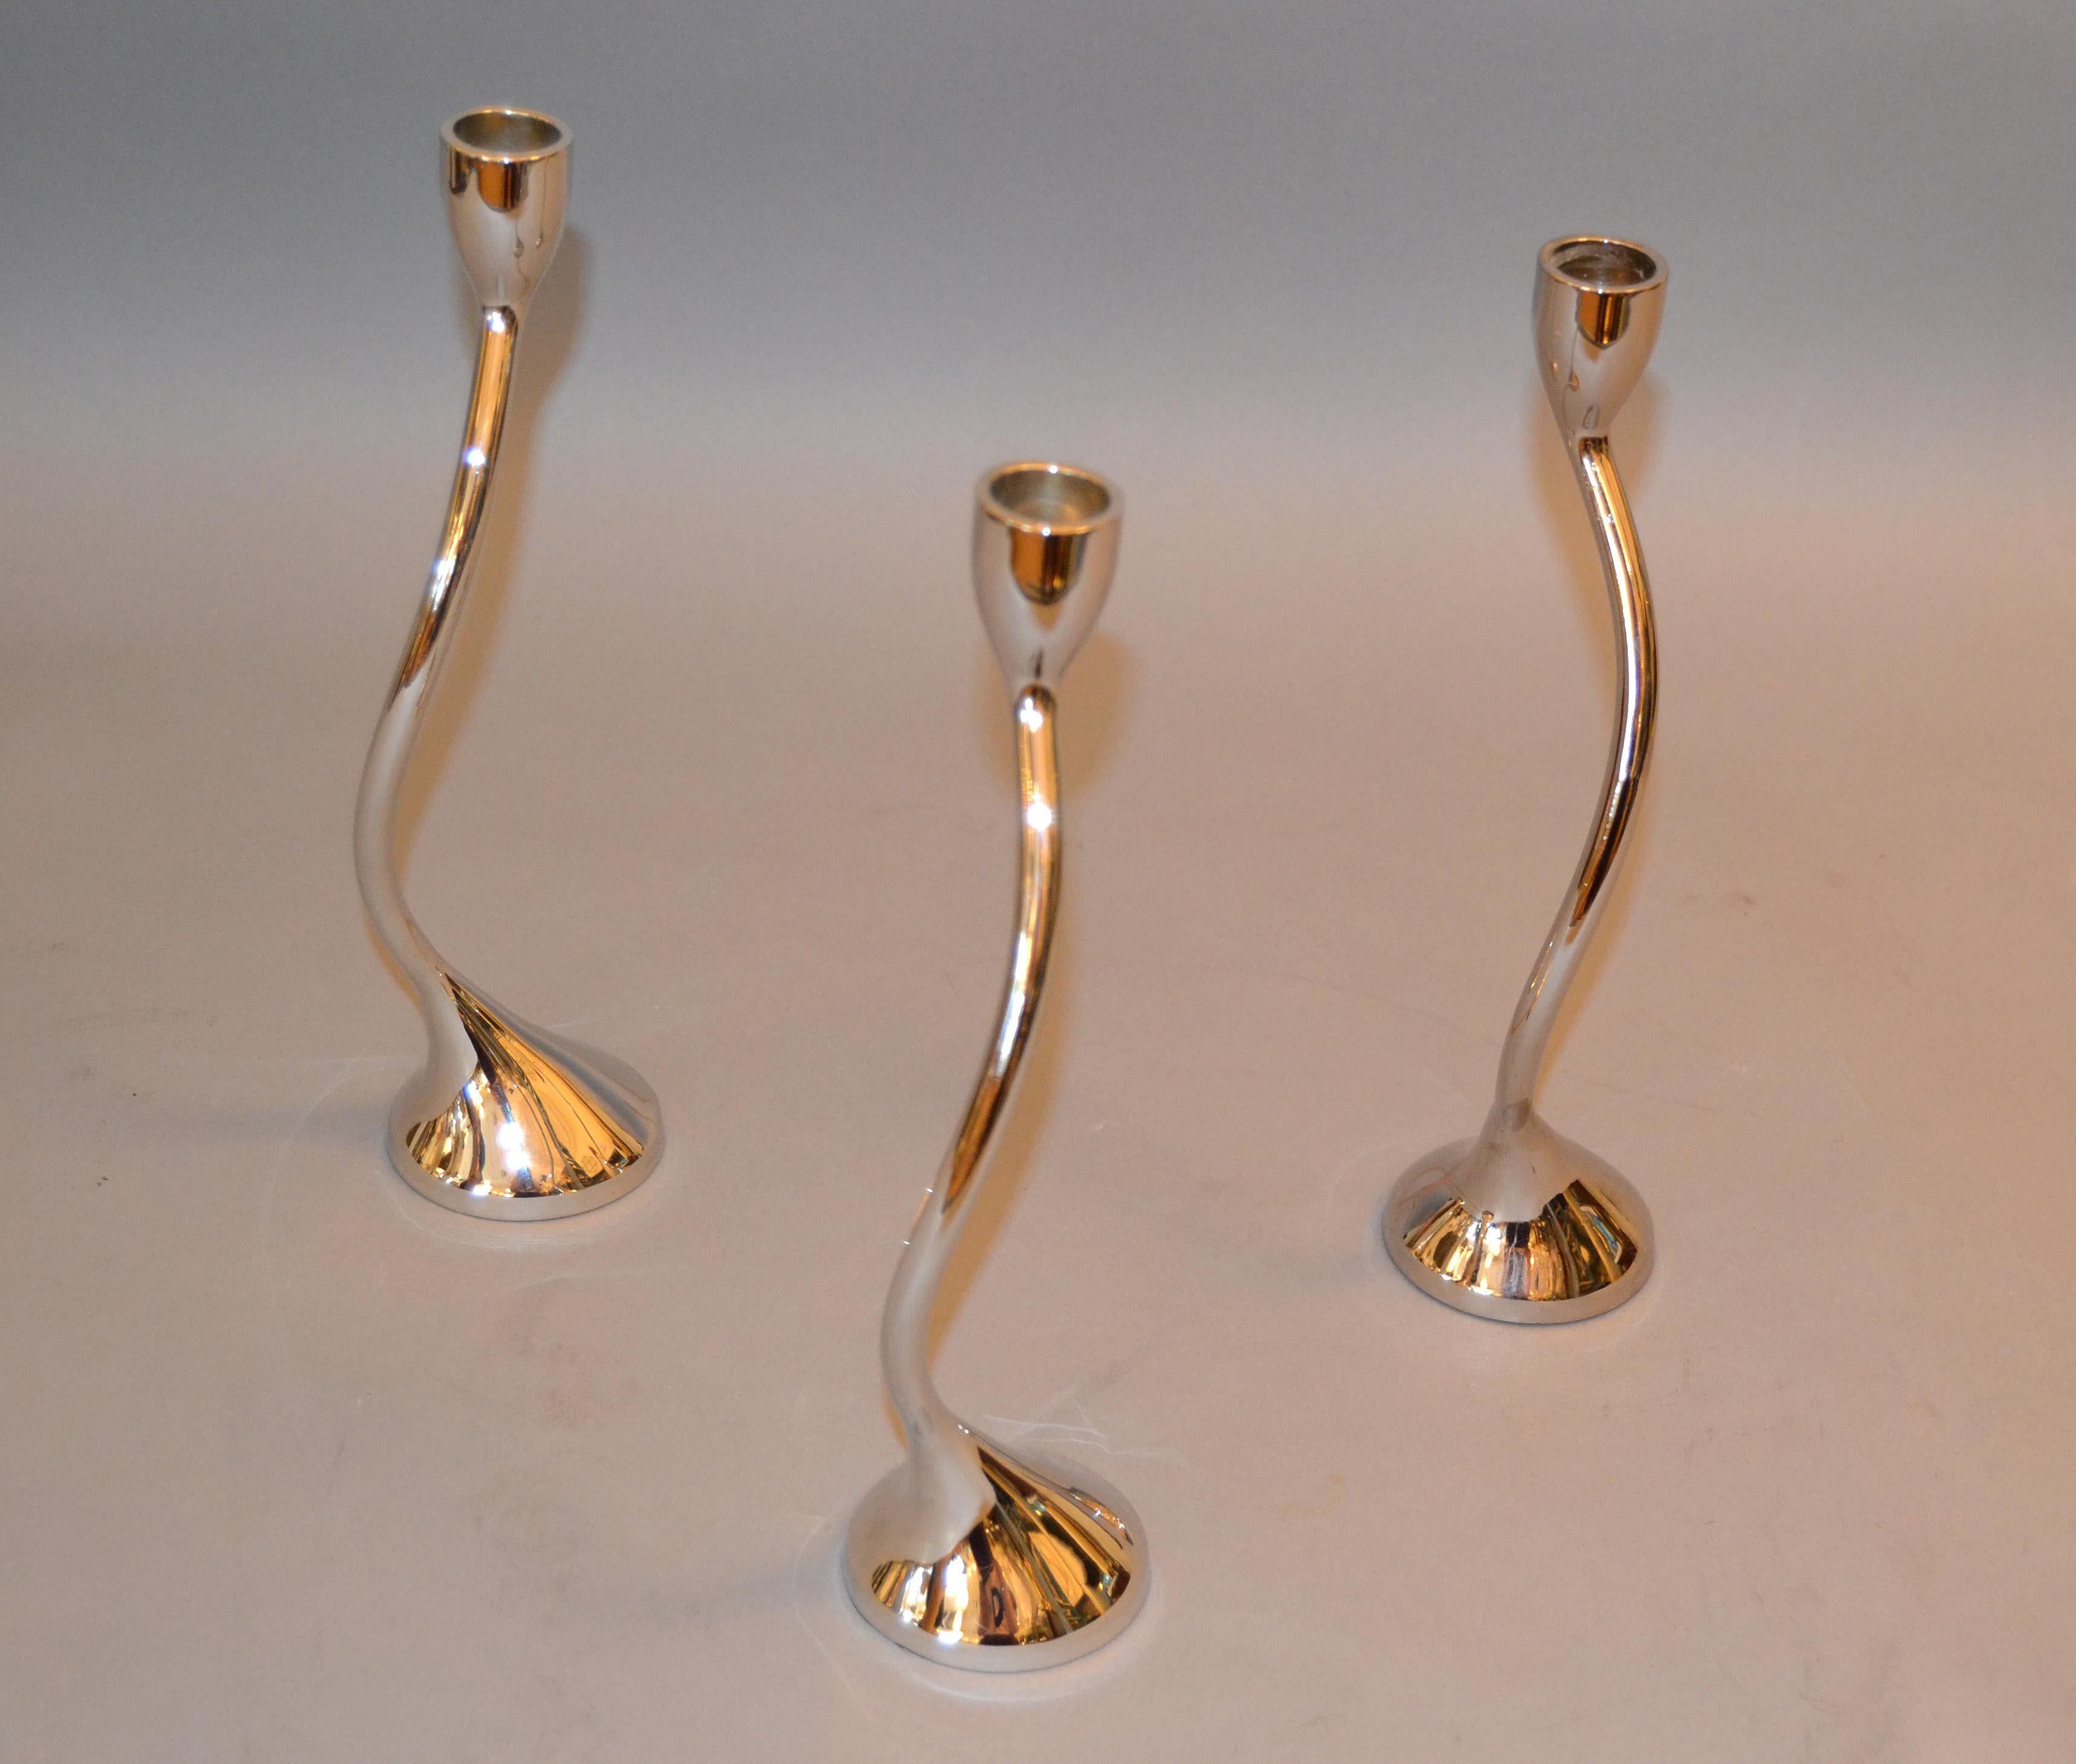 Set of 3 modern silver chrome taper candlestick holders intertwined.
Makers Mark underneath: red ENVELOPE;
They can be arranged in many different ways.
  